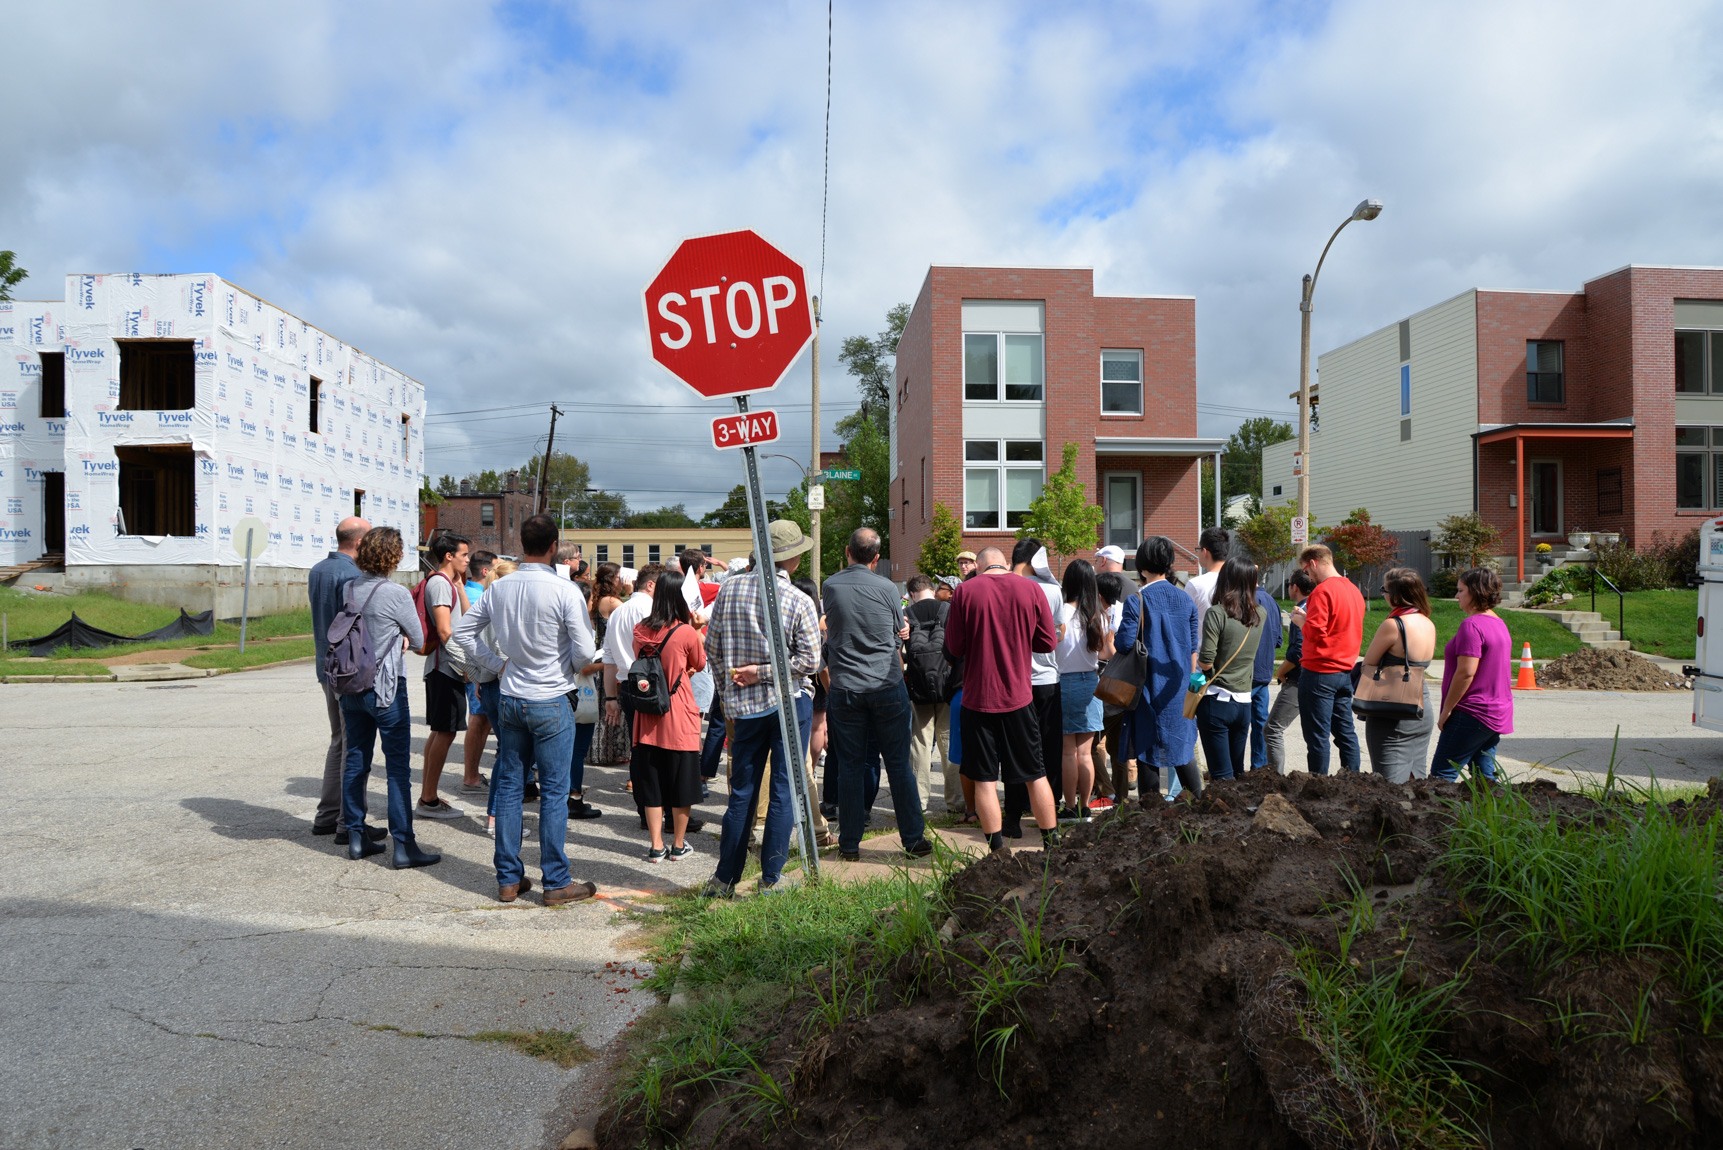 A large group gathers at in a residential neighborhood under construction by an intersection.